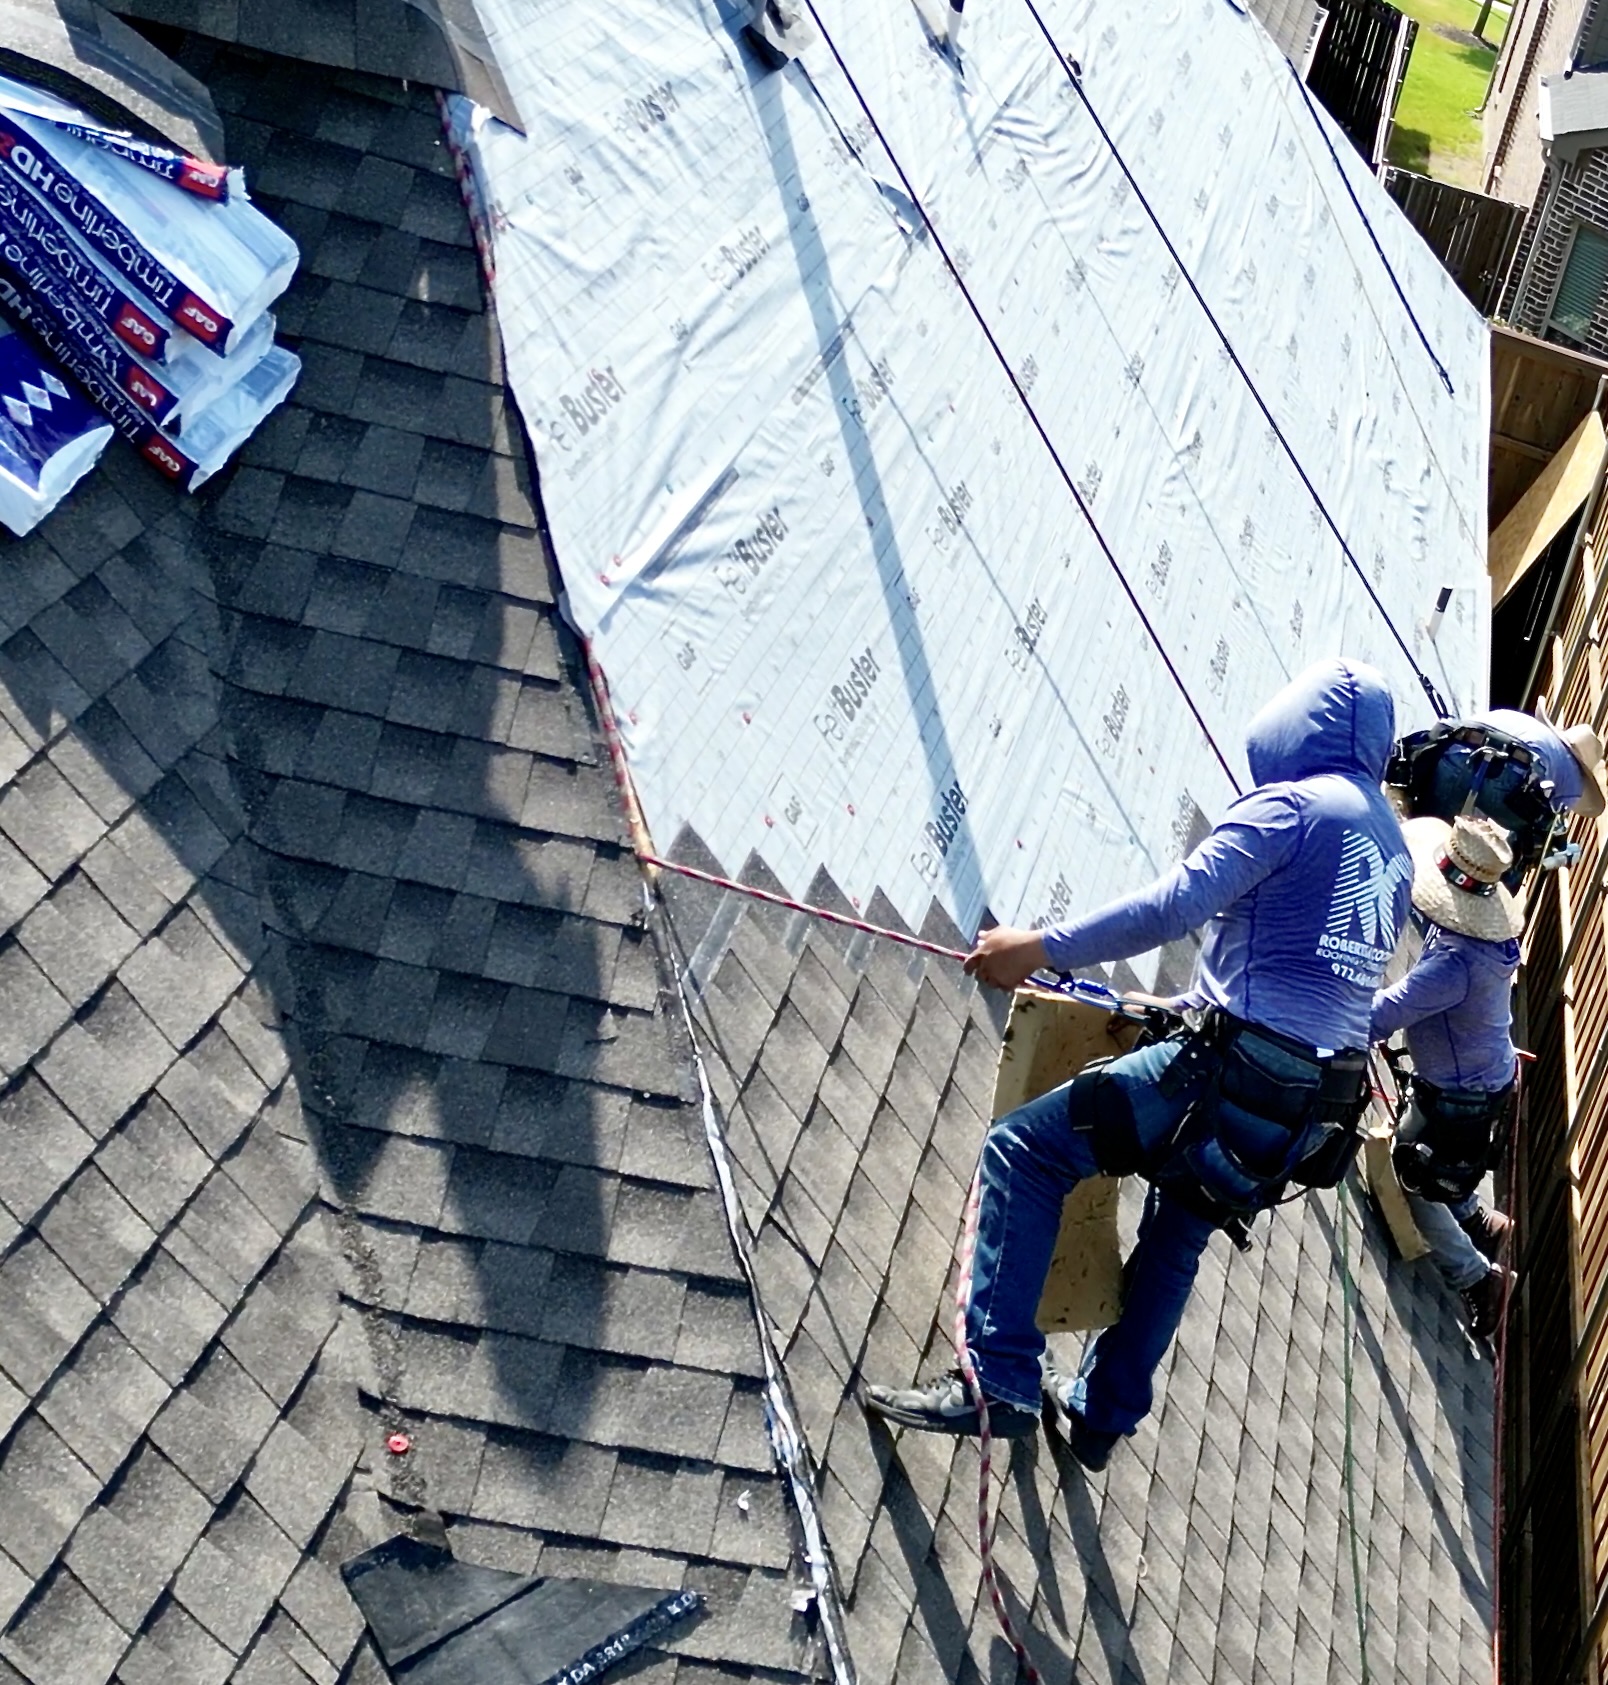 Men are hanging in harnesses, installing a roof onto a home.